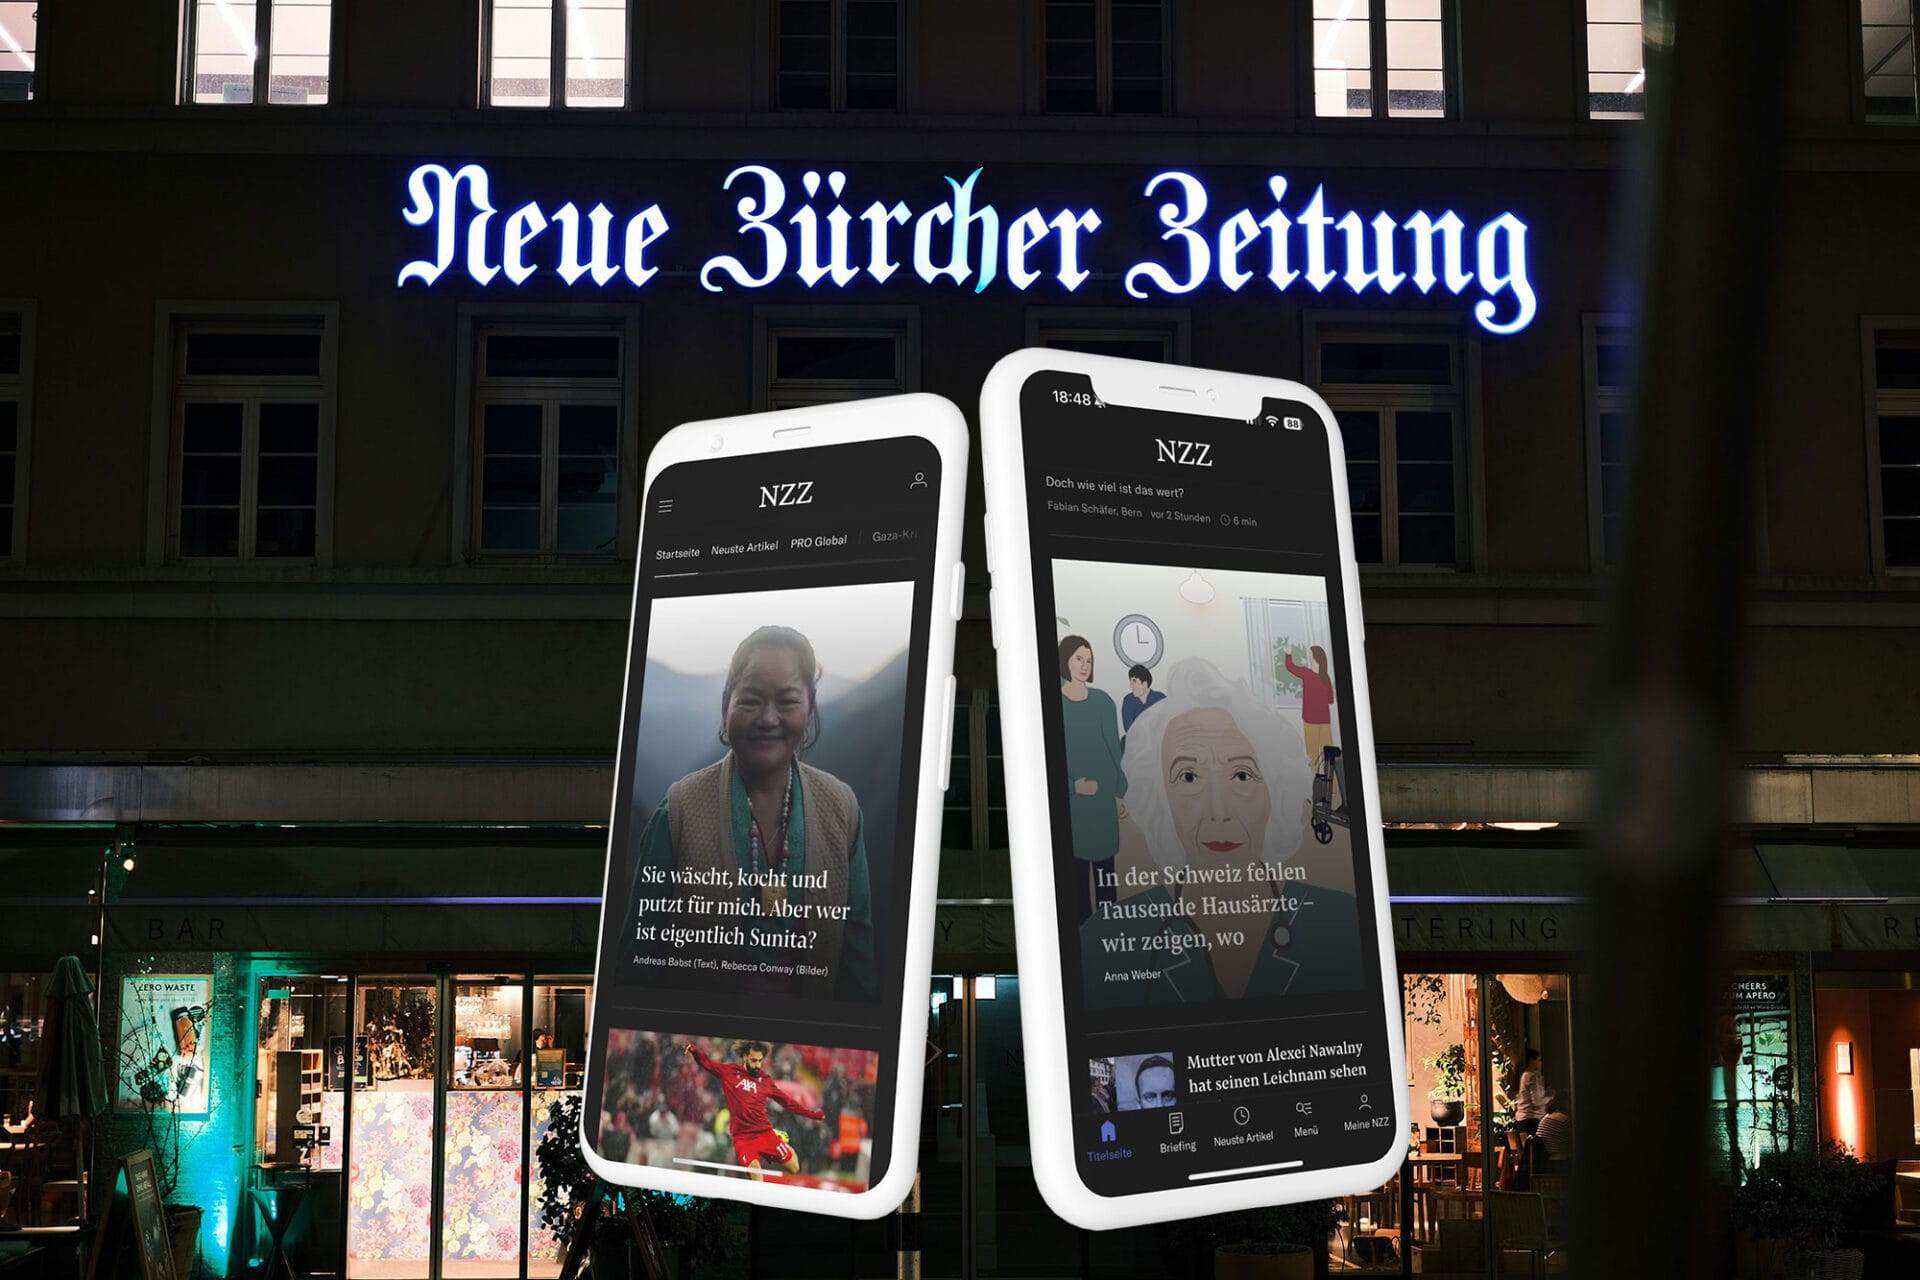 NZZ: A new concept for the new front-page